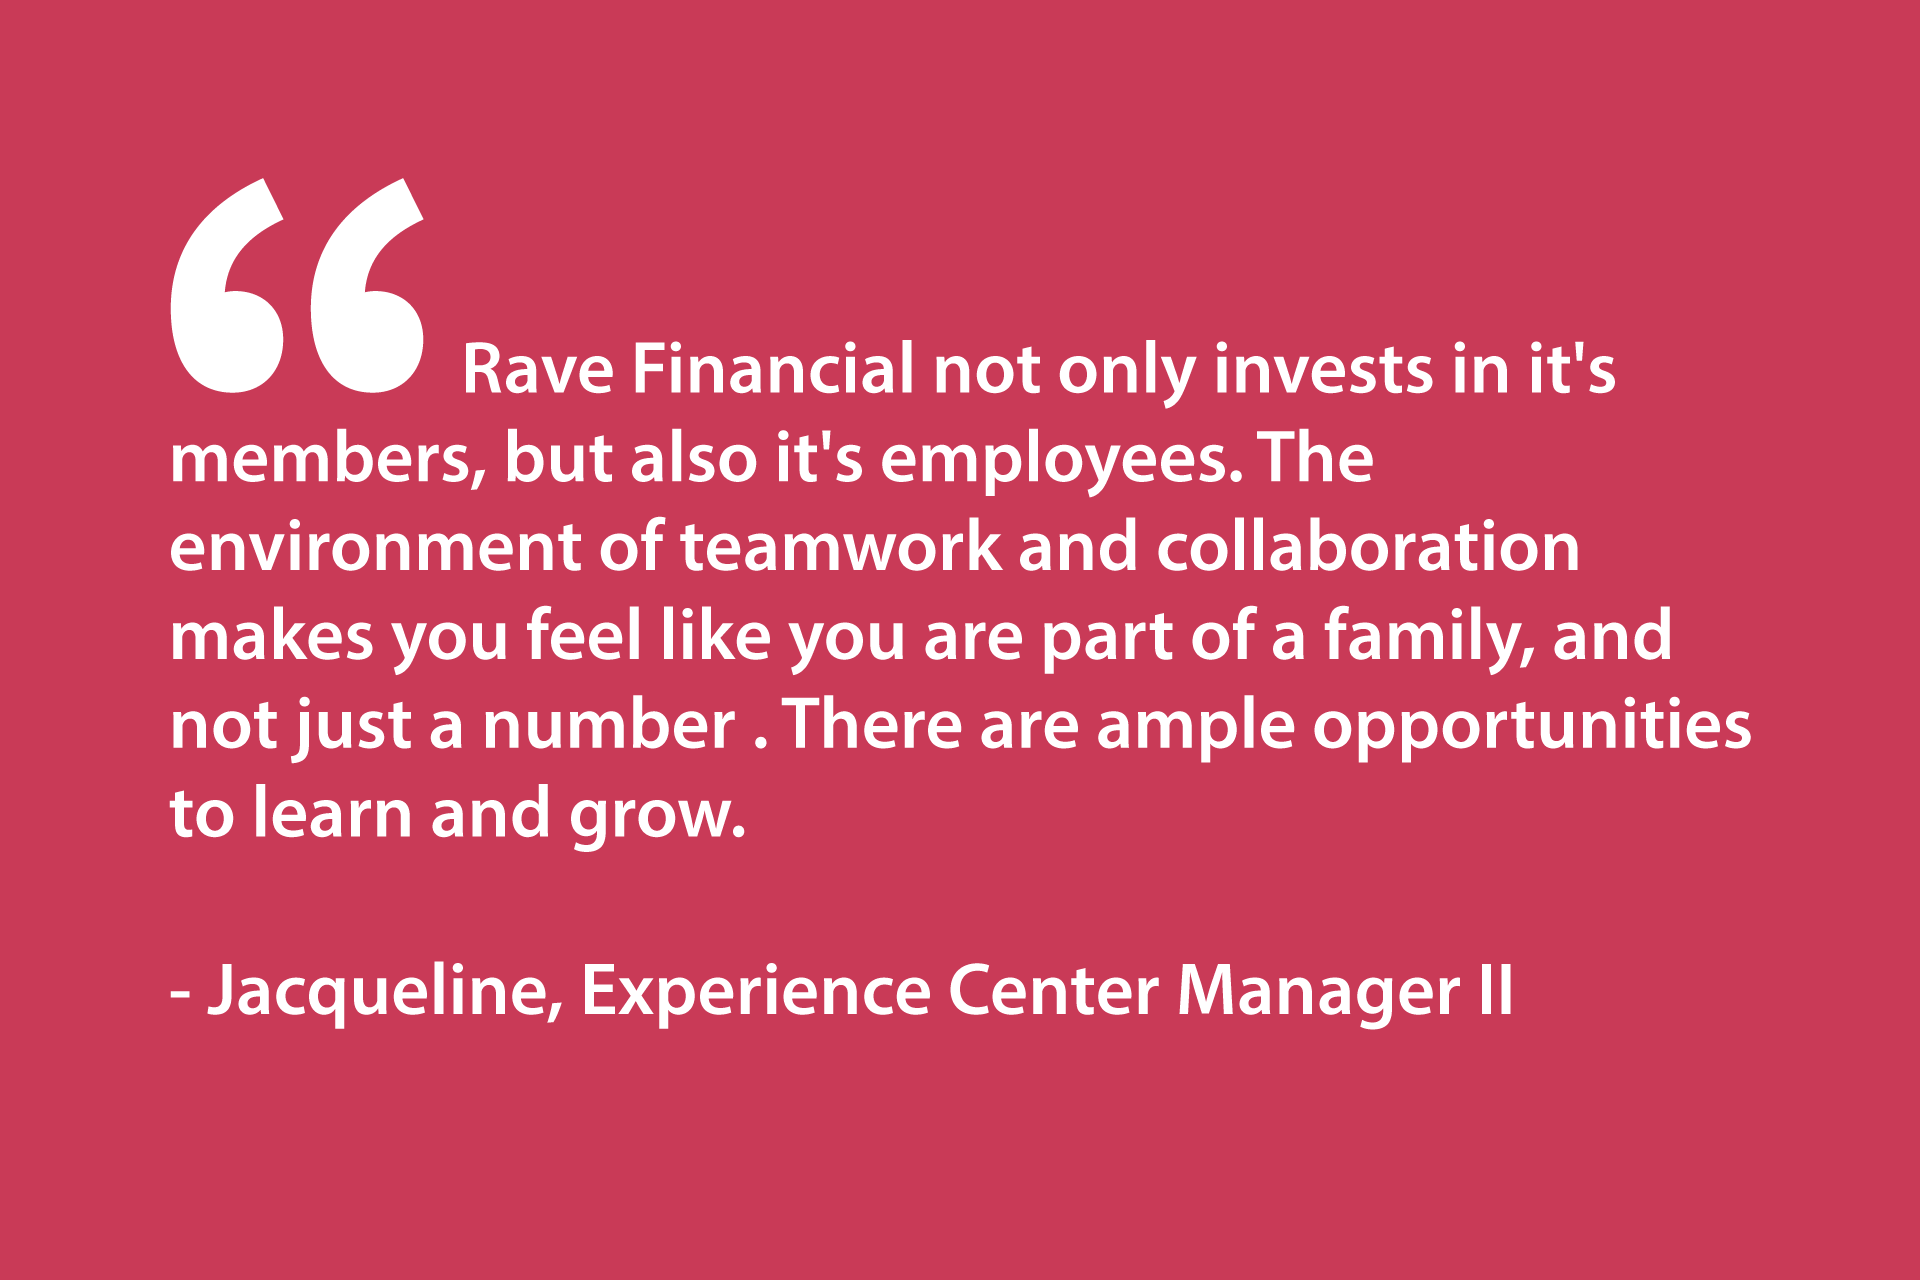 Rave Financial not only invests in it's members, but also it's employees. The environment of teamwork and collaboration makes you feel like you are part of a family, and not just a number . There are ample opportunities to learn and grow. - Jacqueline, Experience Center Manager II